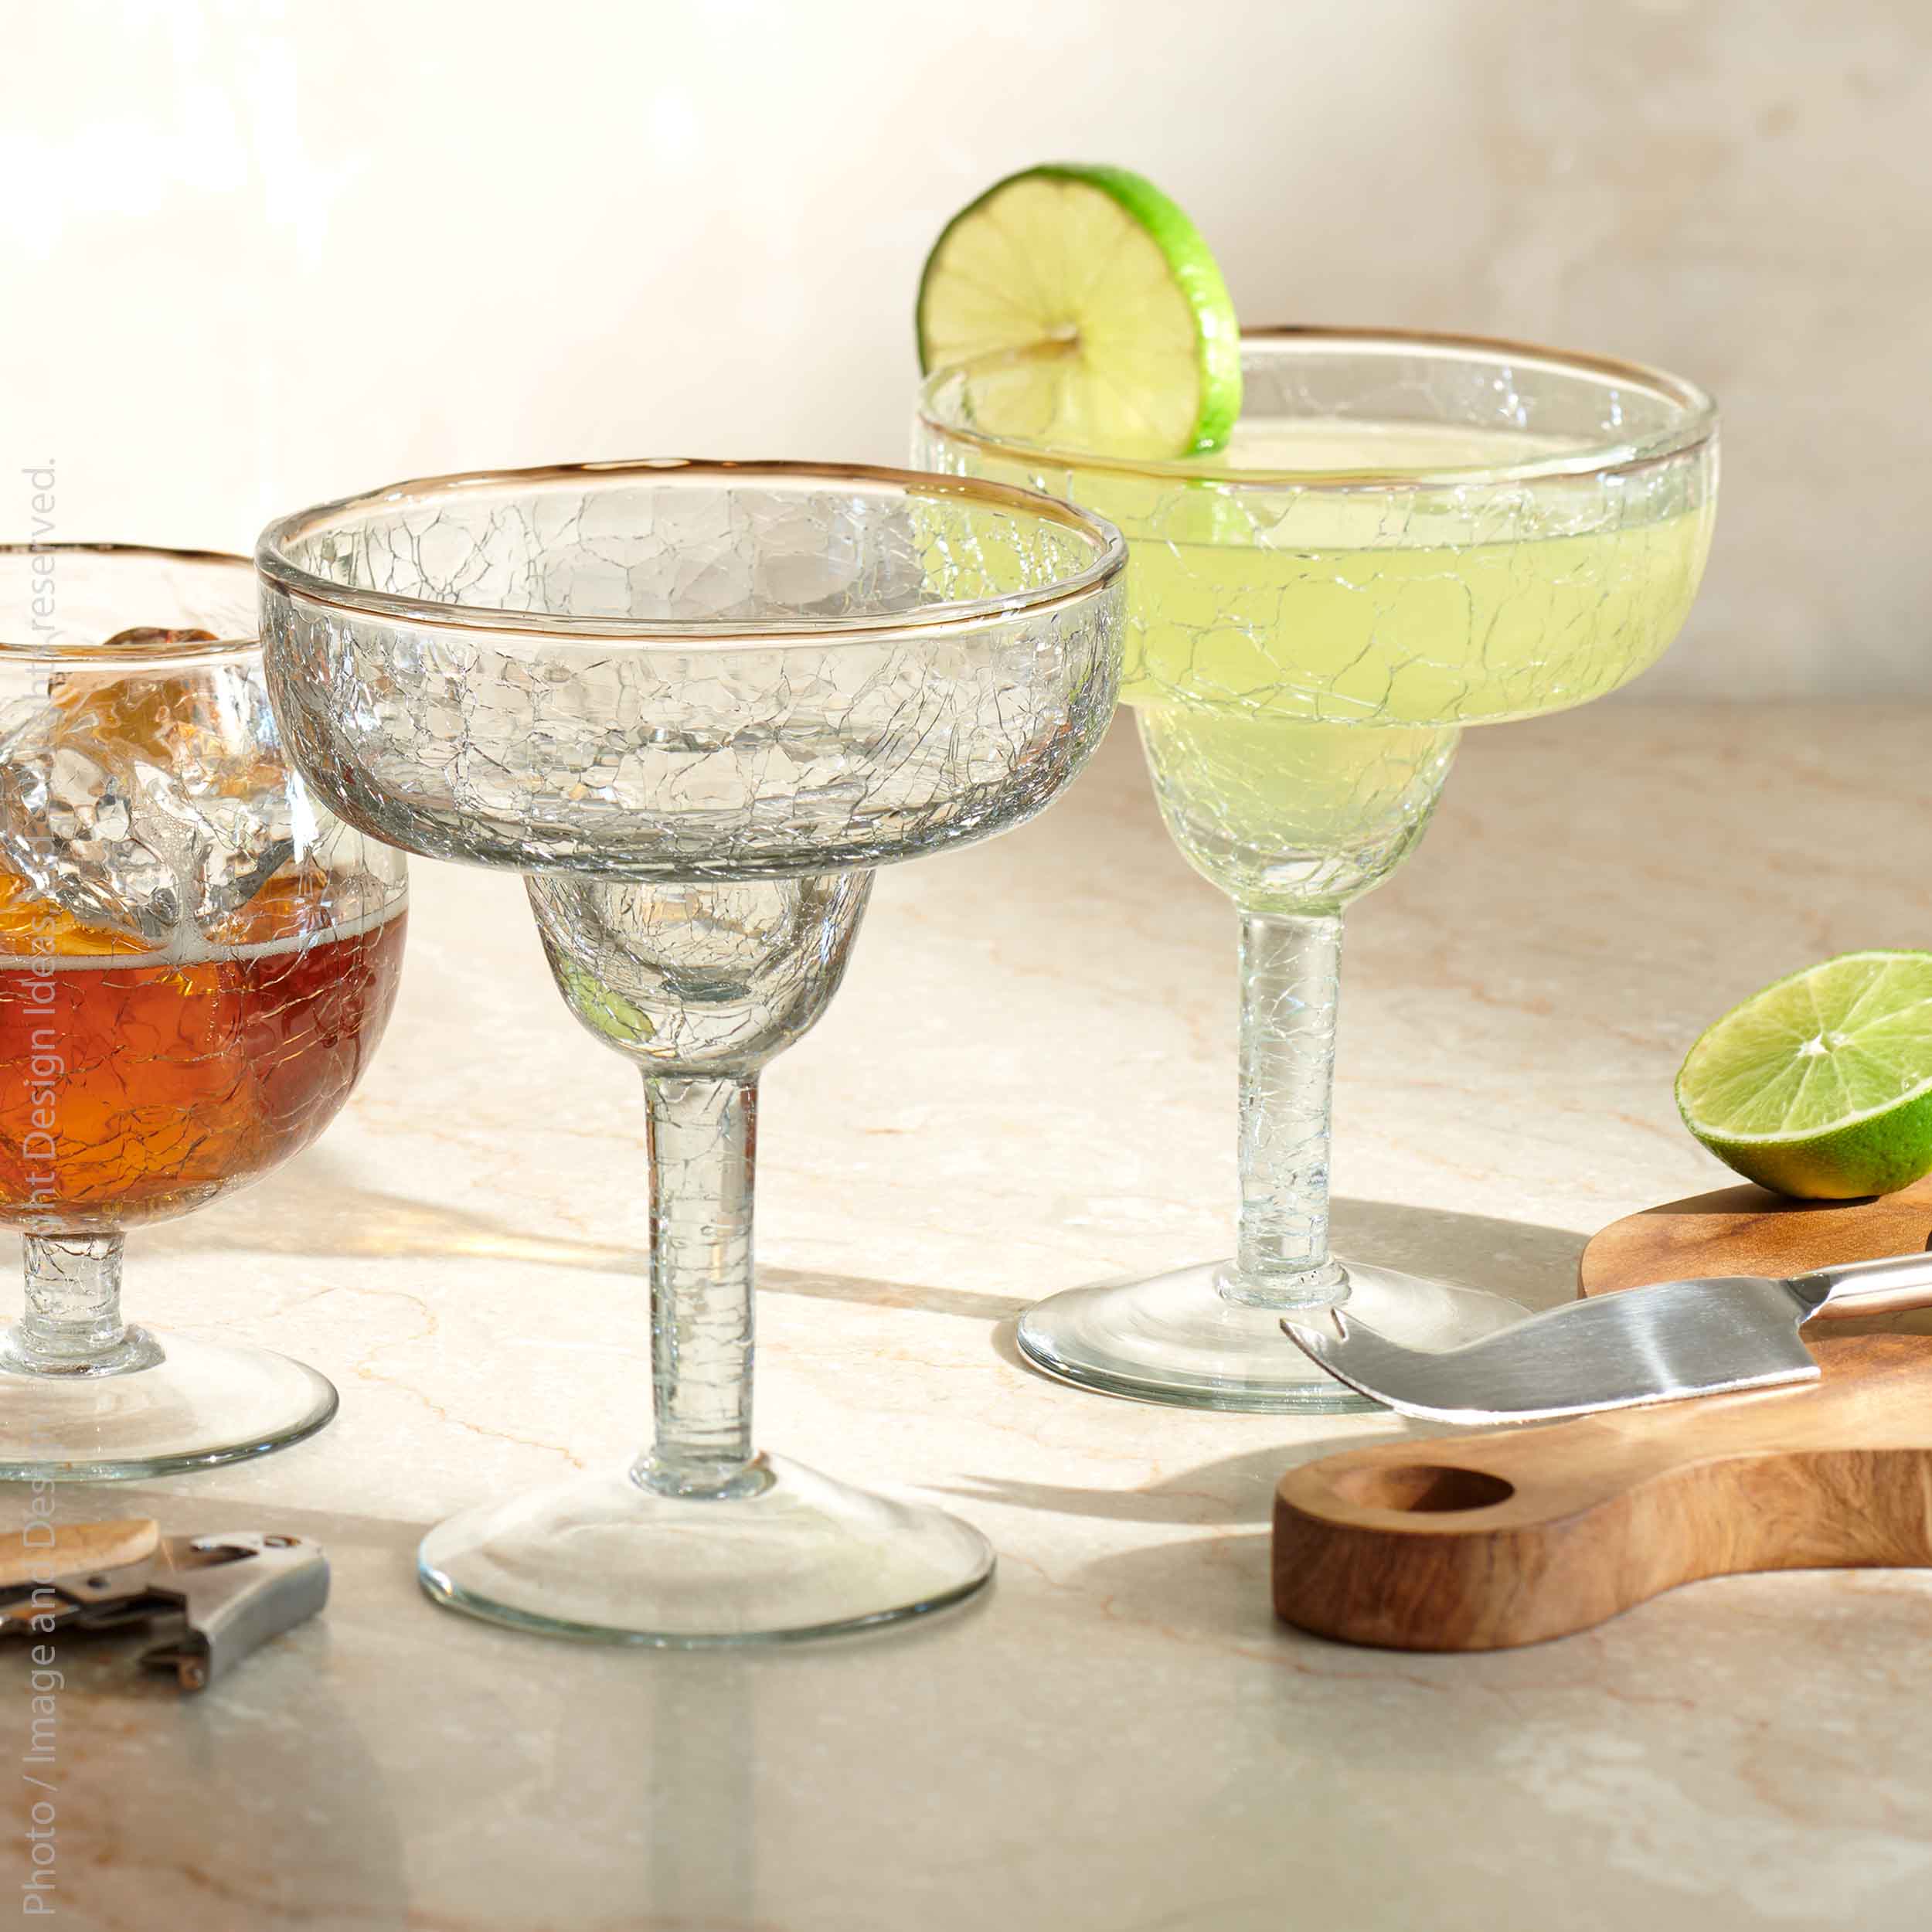 Norwell™ Margarita Glass (set of 4) - Mouth blown, hand made glass - 50% Recycled - (colors: Clear) | Premium Glass from the Norwell™ collection | made with Glass  - 50% Recycled for long lasting use